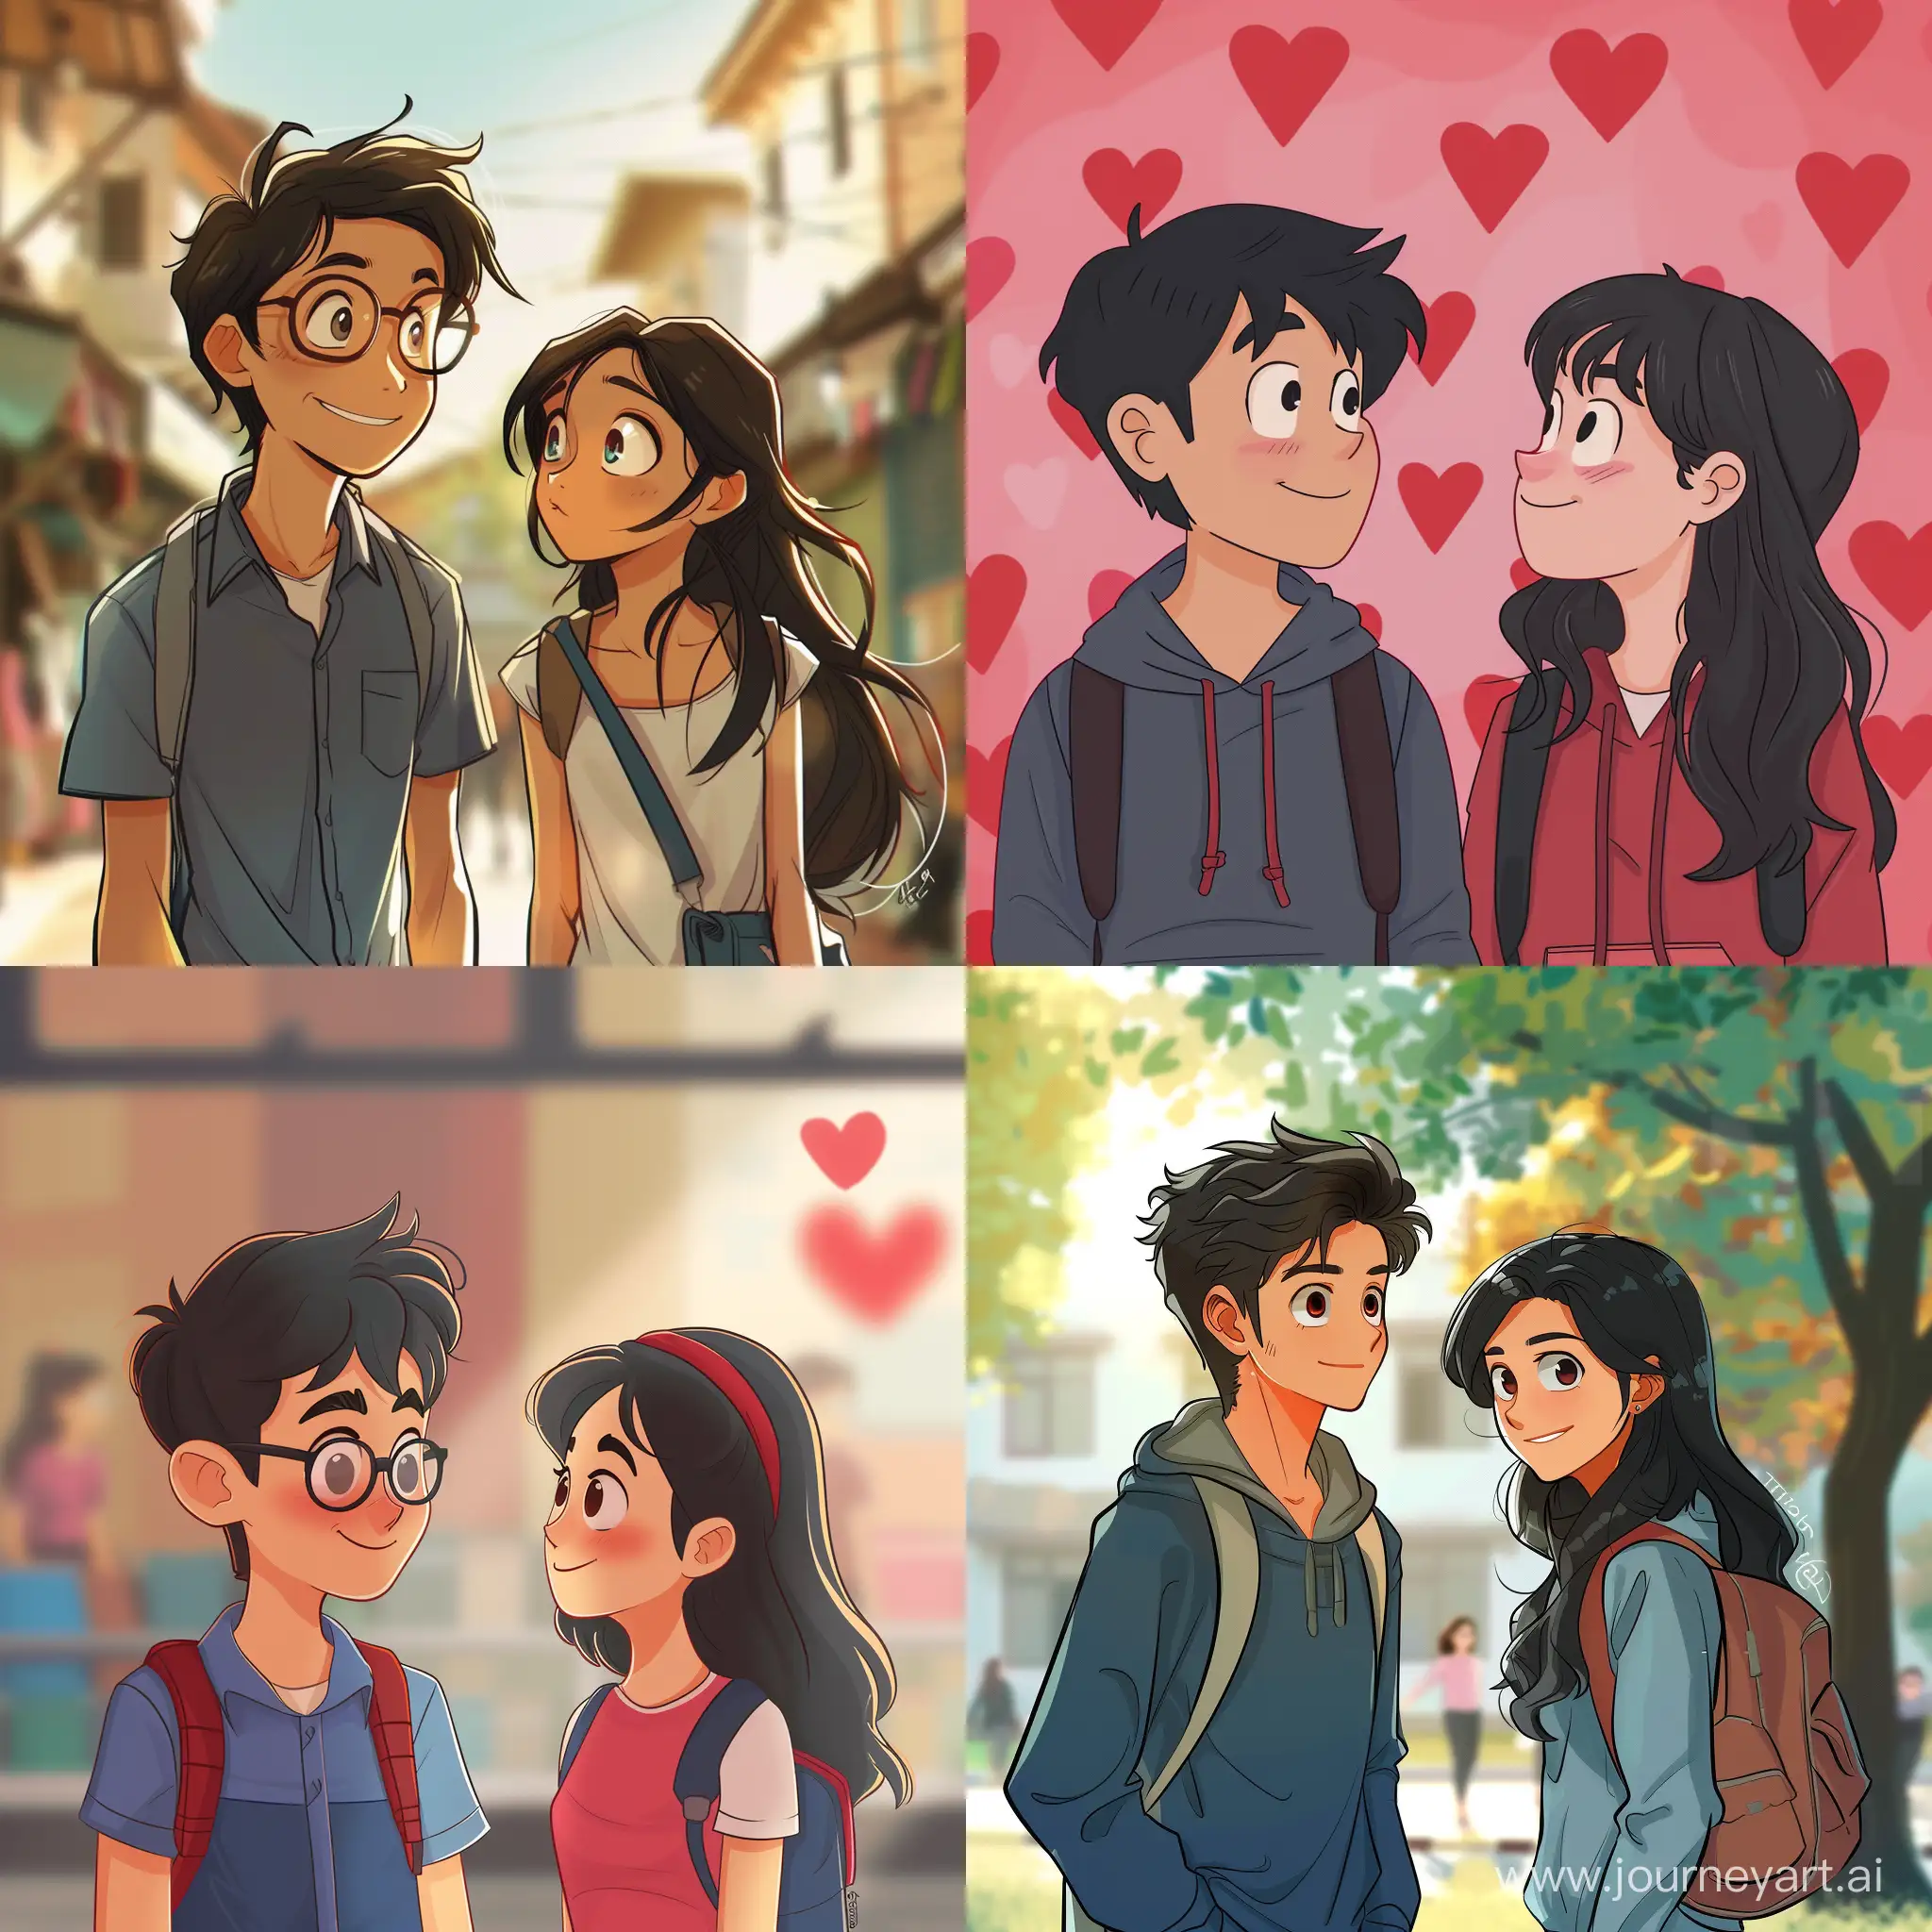 a picture containing a BITS Pilani university guy and a girl who are already freinds but they have a sceret crush on eachother but are scared to say it out. Make it look cute, animate it and give a feel that valentines day is coming ahead. it shouldnt be so obvious that they are in love.